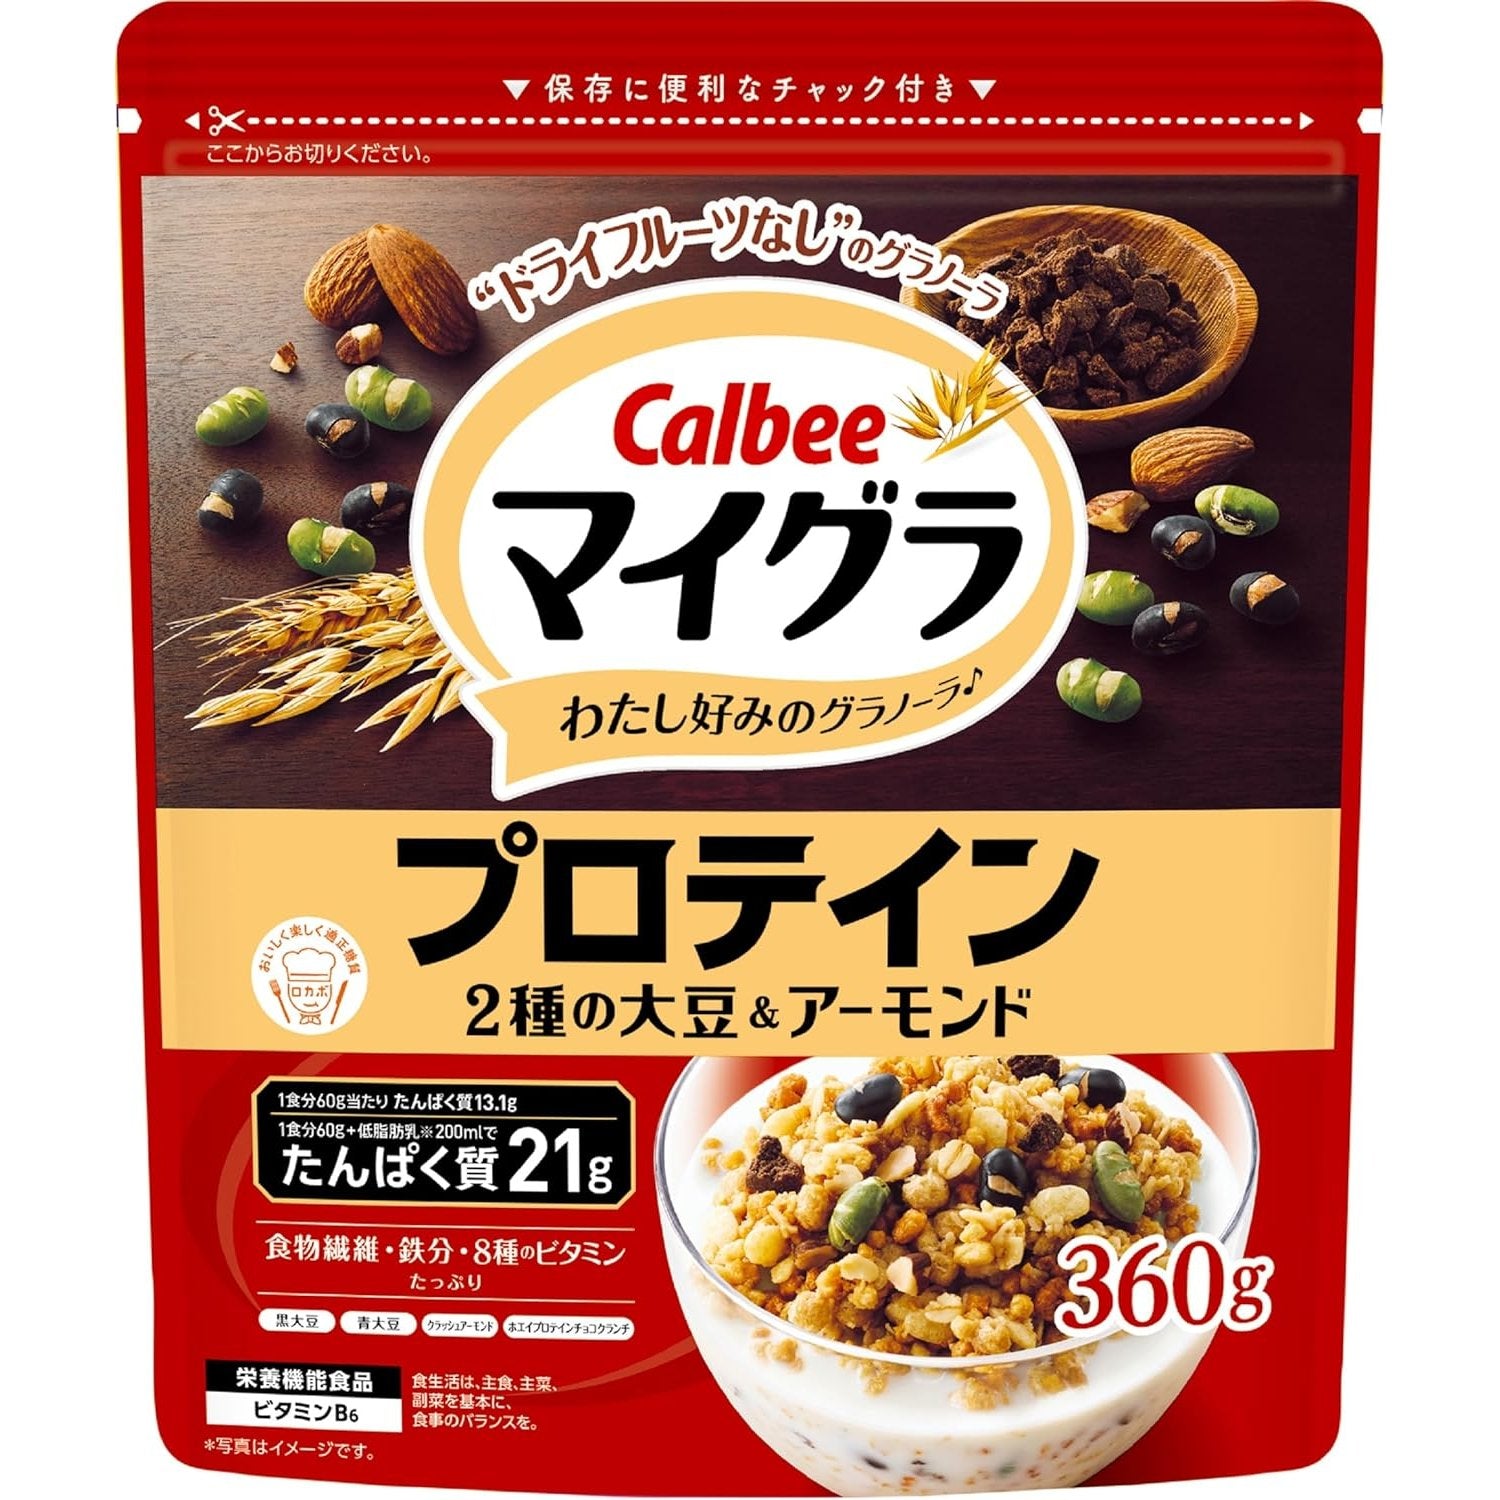 Calbee Whey Protein Granola Cereal With Almonds & Beans 360g